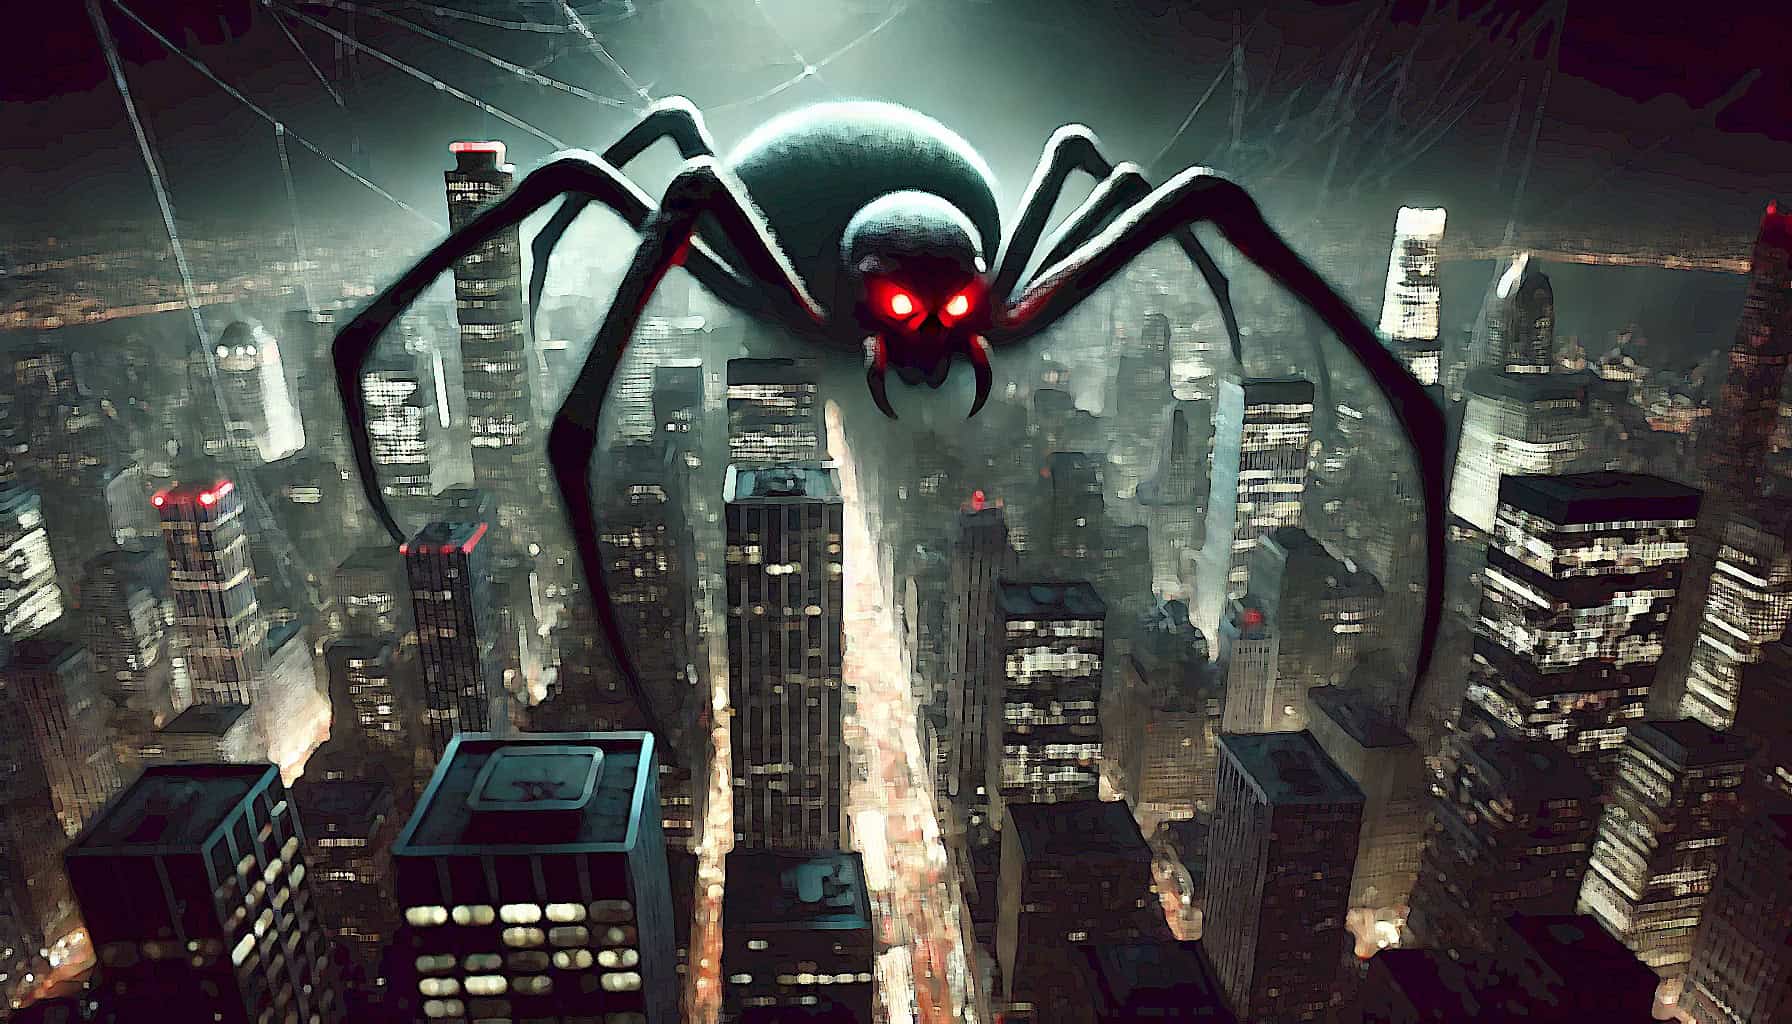 Dark Web of Real Estate (Hidden Cybercrime Threats Decimating Your Empire) - 5,000 foot tall black spider with red eyes standing over a city at night